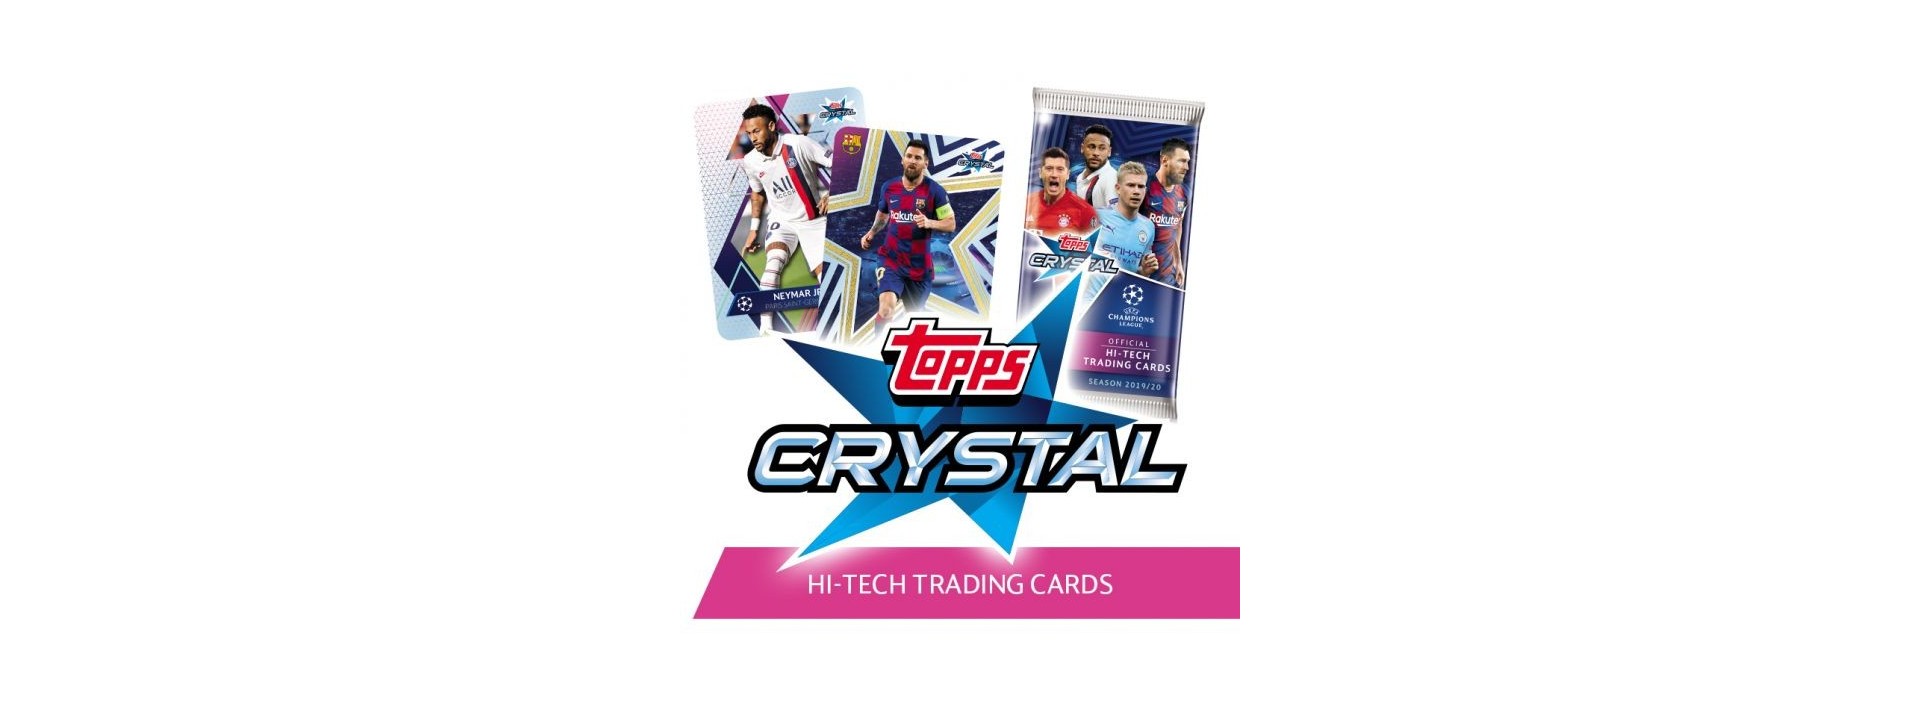 TOPPS CRYSTAL 19/20